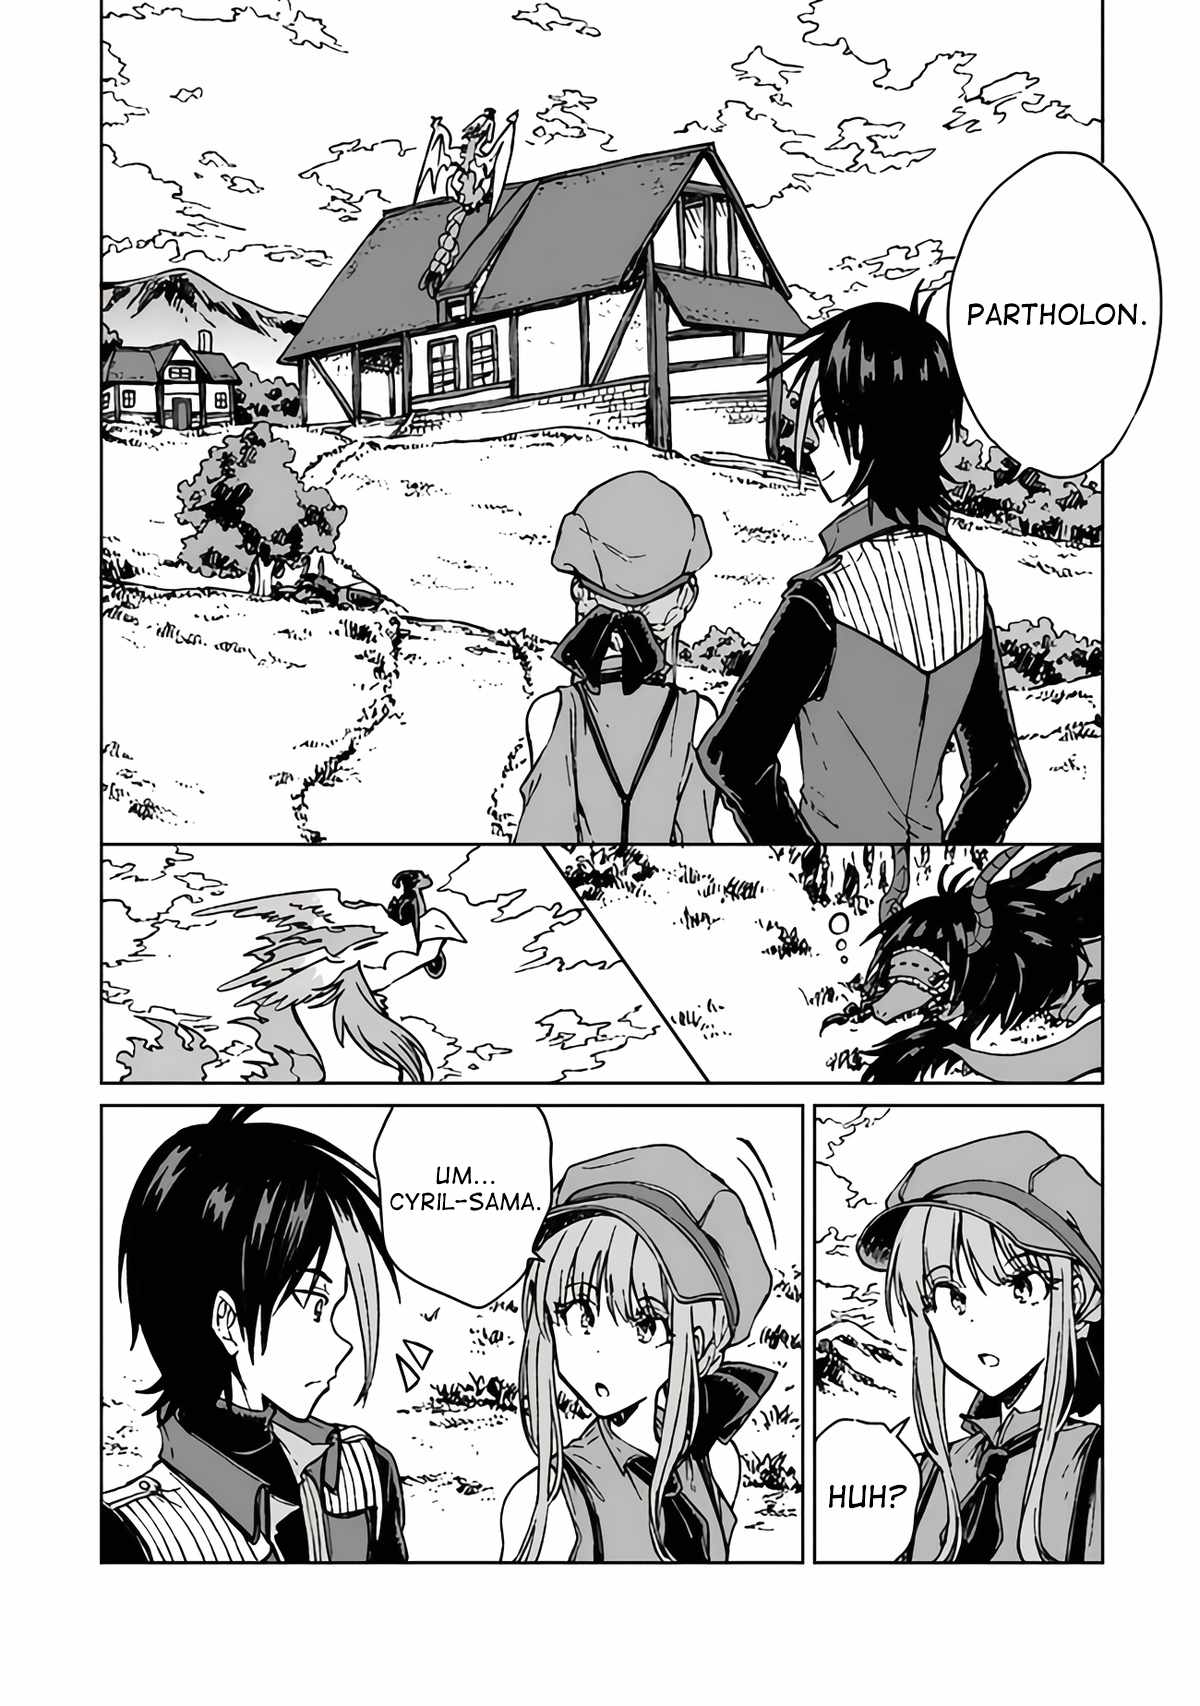 read I've Been Kicked Out of an S-Rank Guild. But Only I Can Communicate With Dragons. Before I Knew It, I Became the Greatest Dragon Knight Chapter 19 Manga Online Free at Mangabuddy, MangaNato,Manhwatop | MangaSo.com